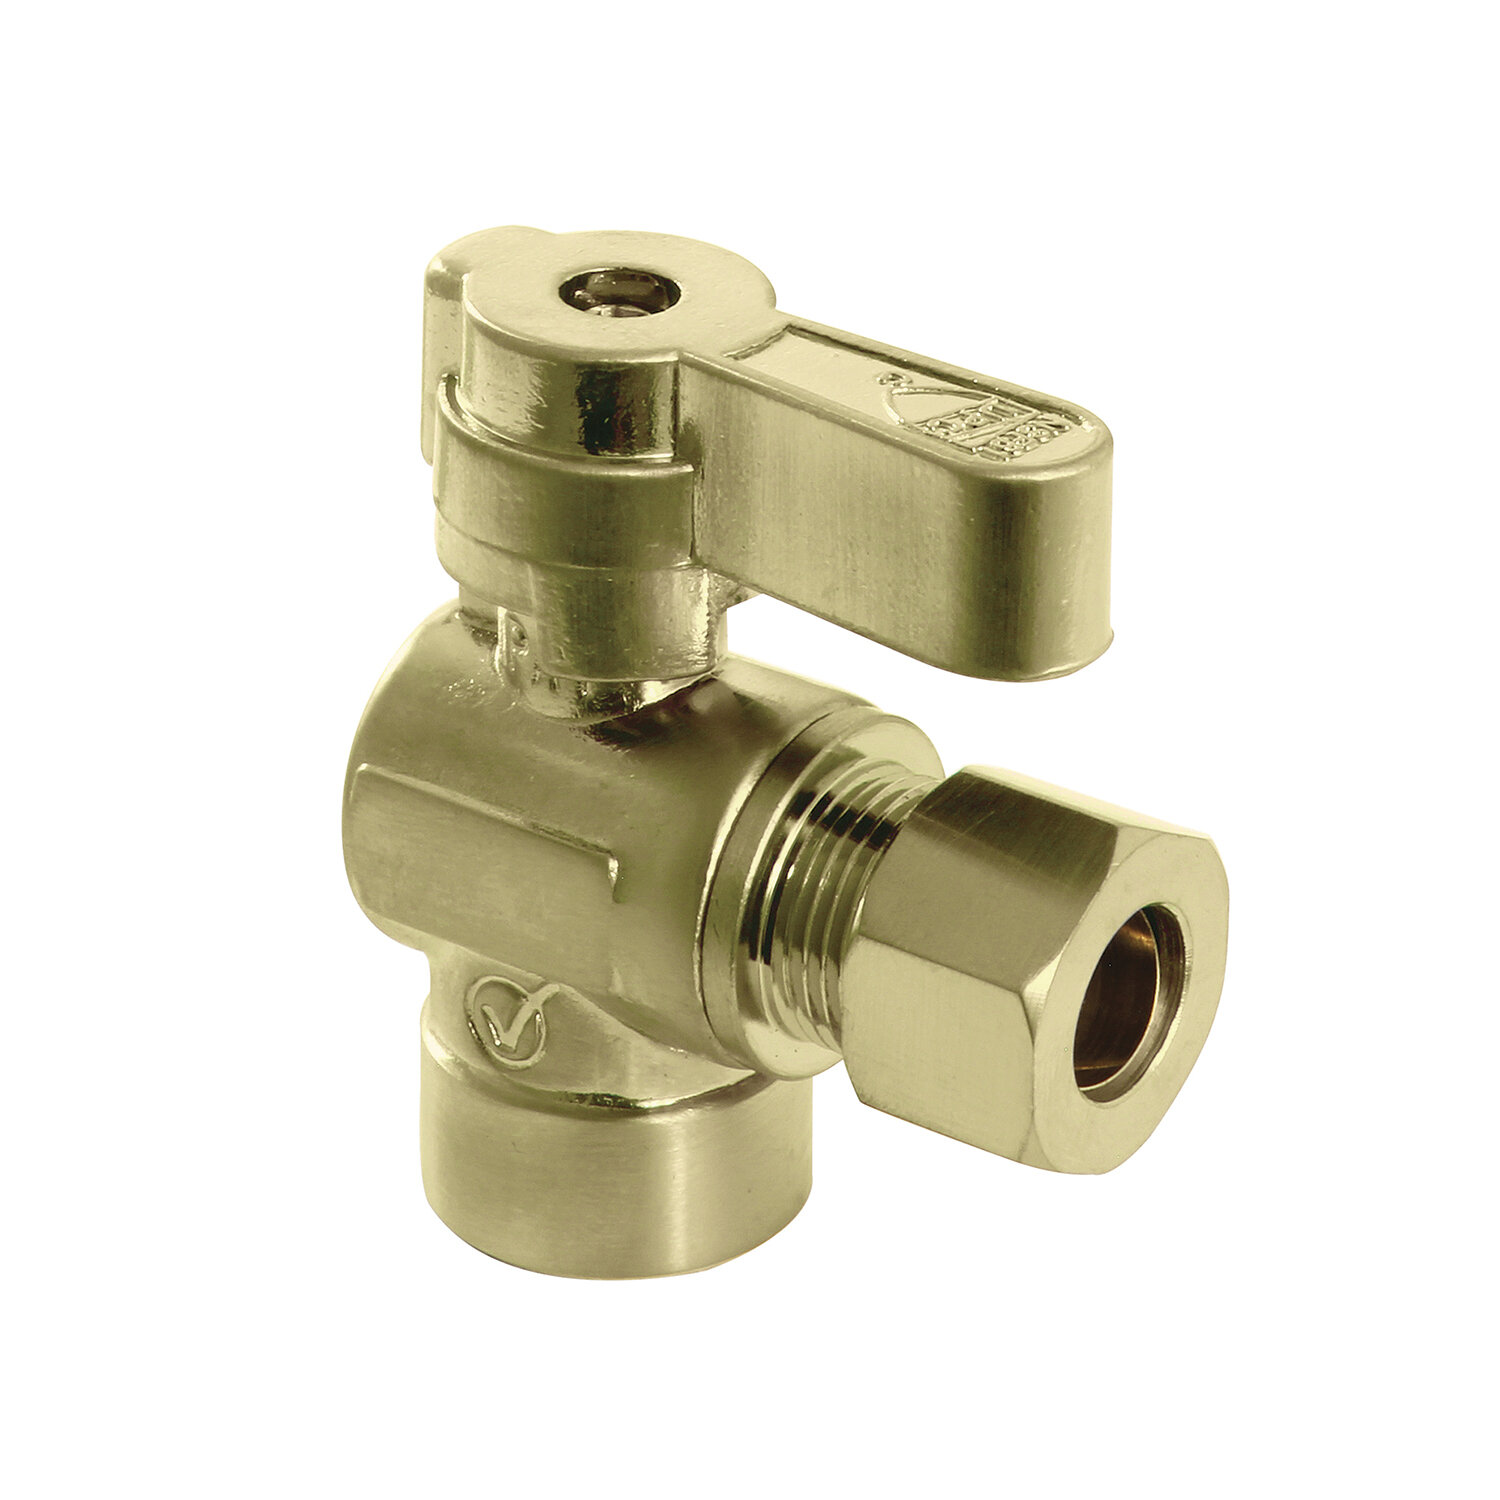 What Is An Angle Stop Valve (And Why Do I Need One)?